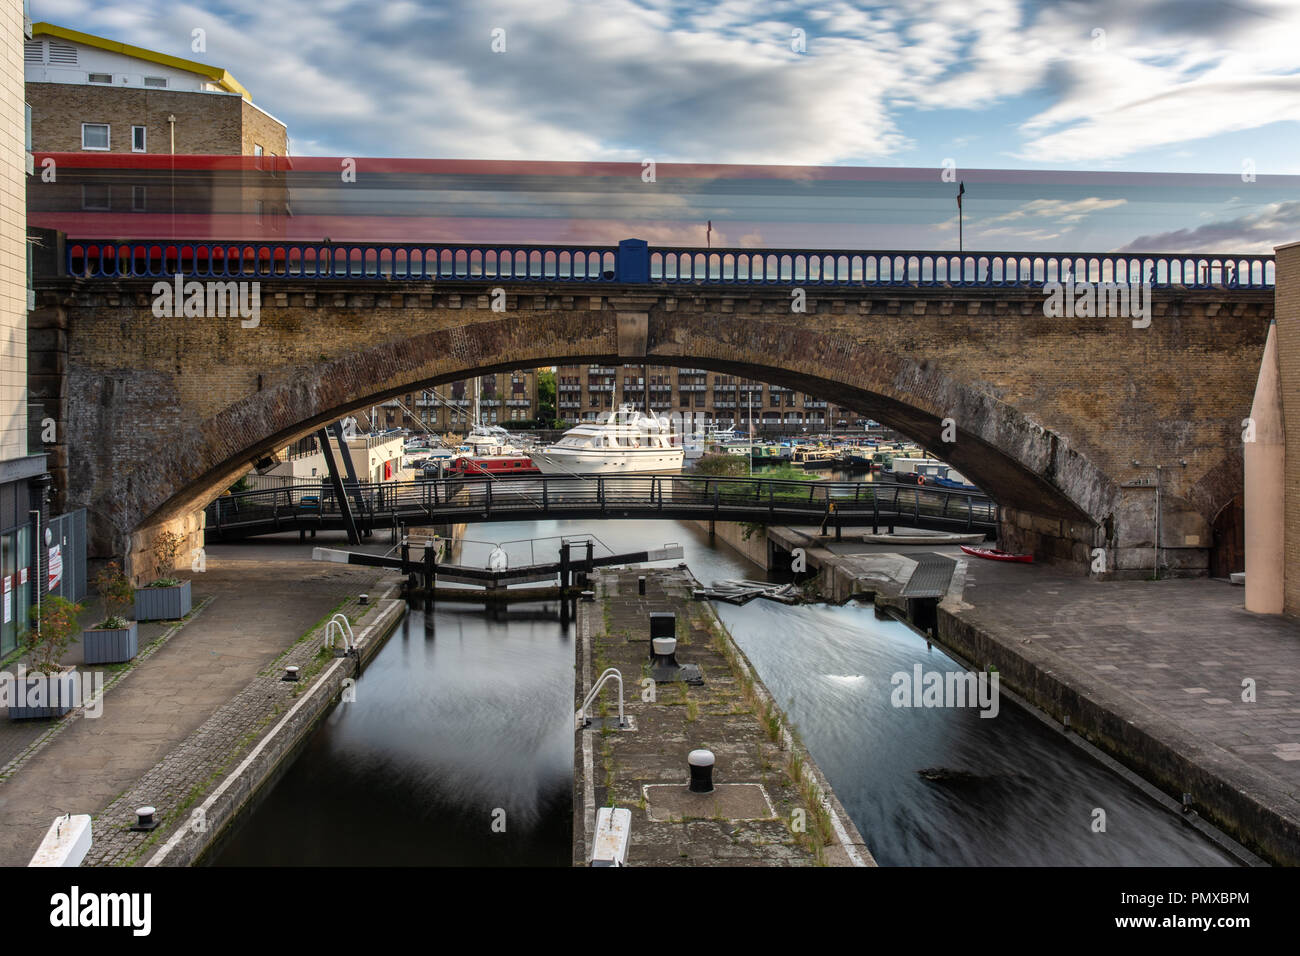 London, England, UK - September 14, 2018: A Docklands Light Railway train forms a blur as it speeds across a viaduct over the Regent's Canal at Limeho Stock Photo